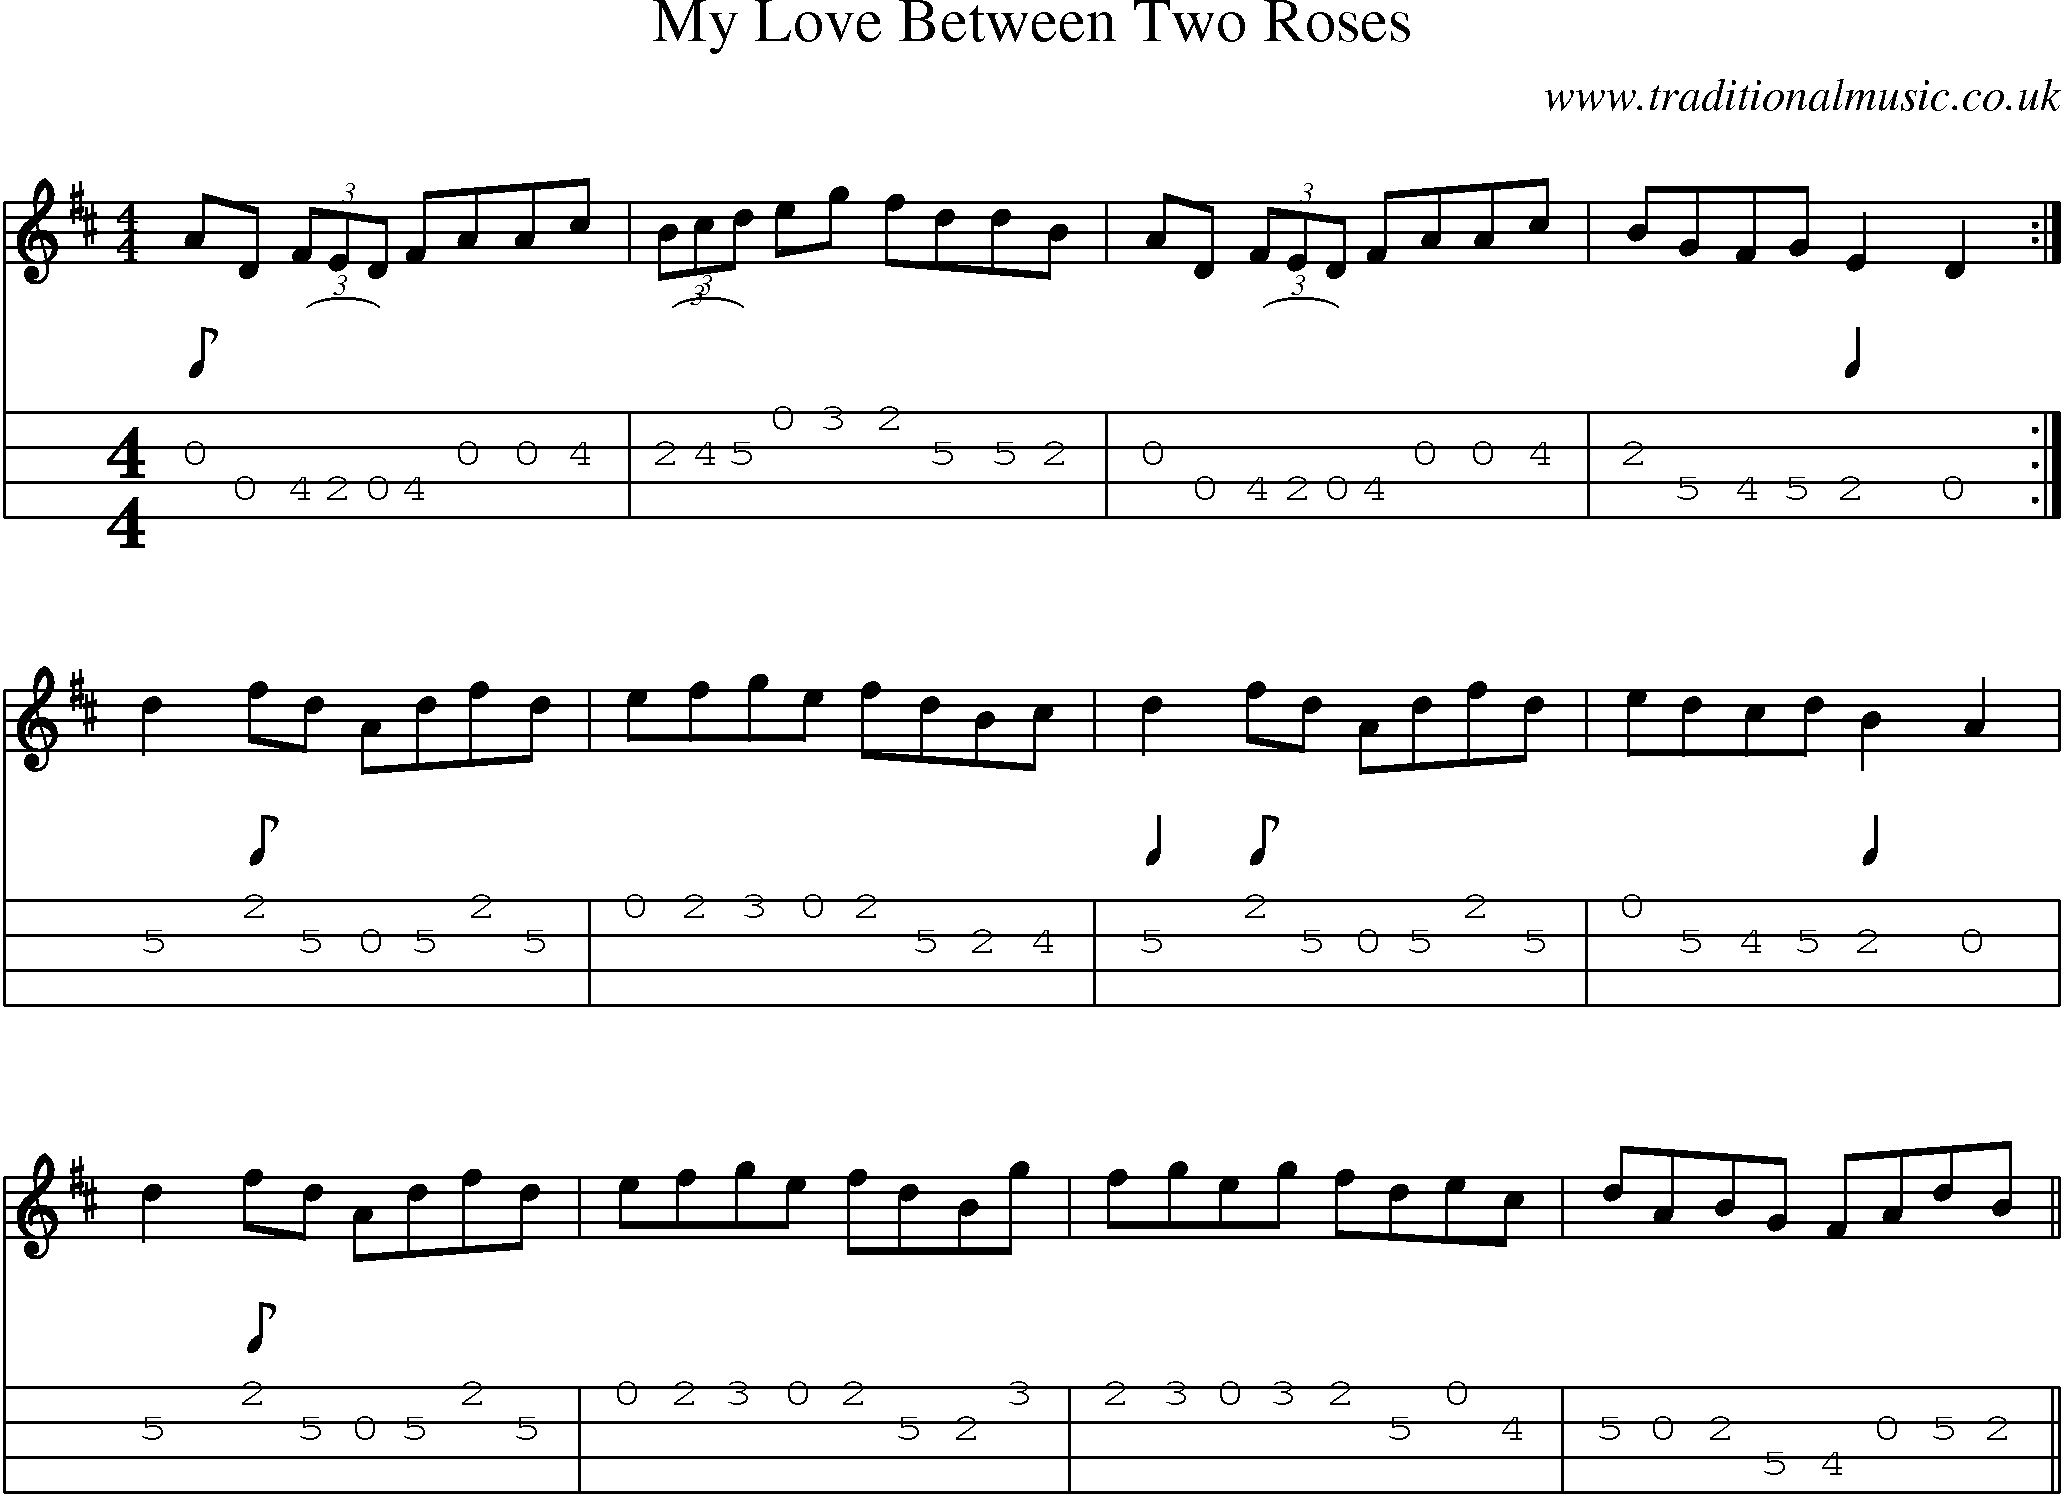 Music Score and Mandolin Tabs for My Love Between Two Roses